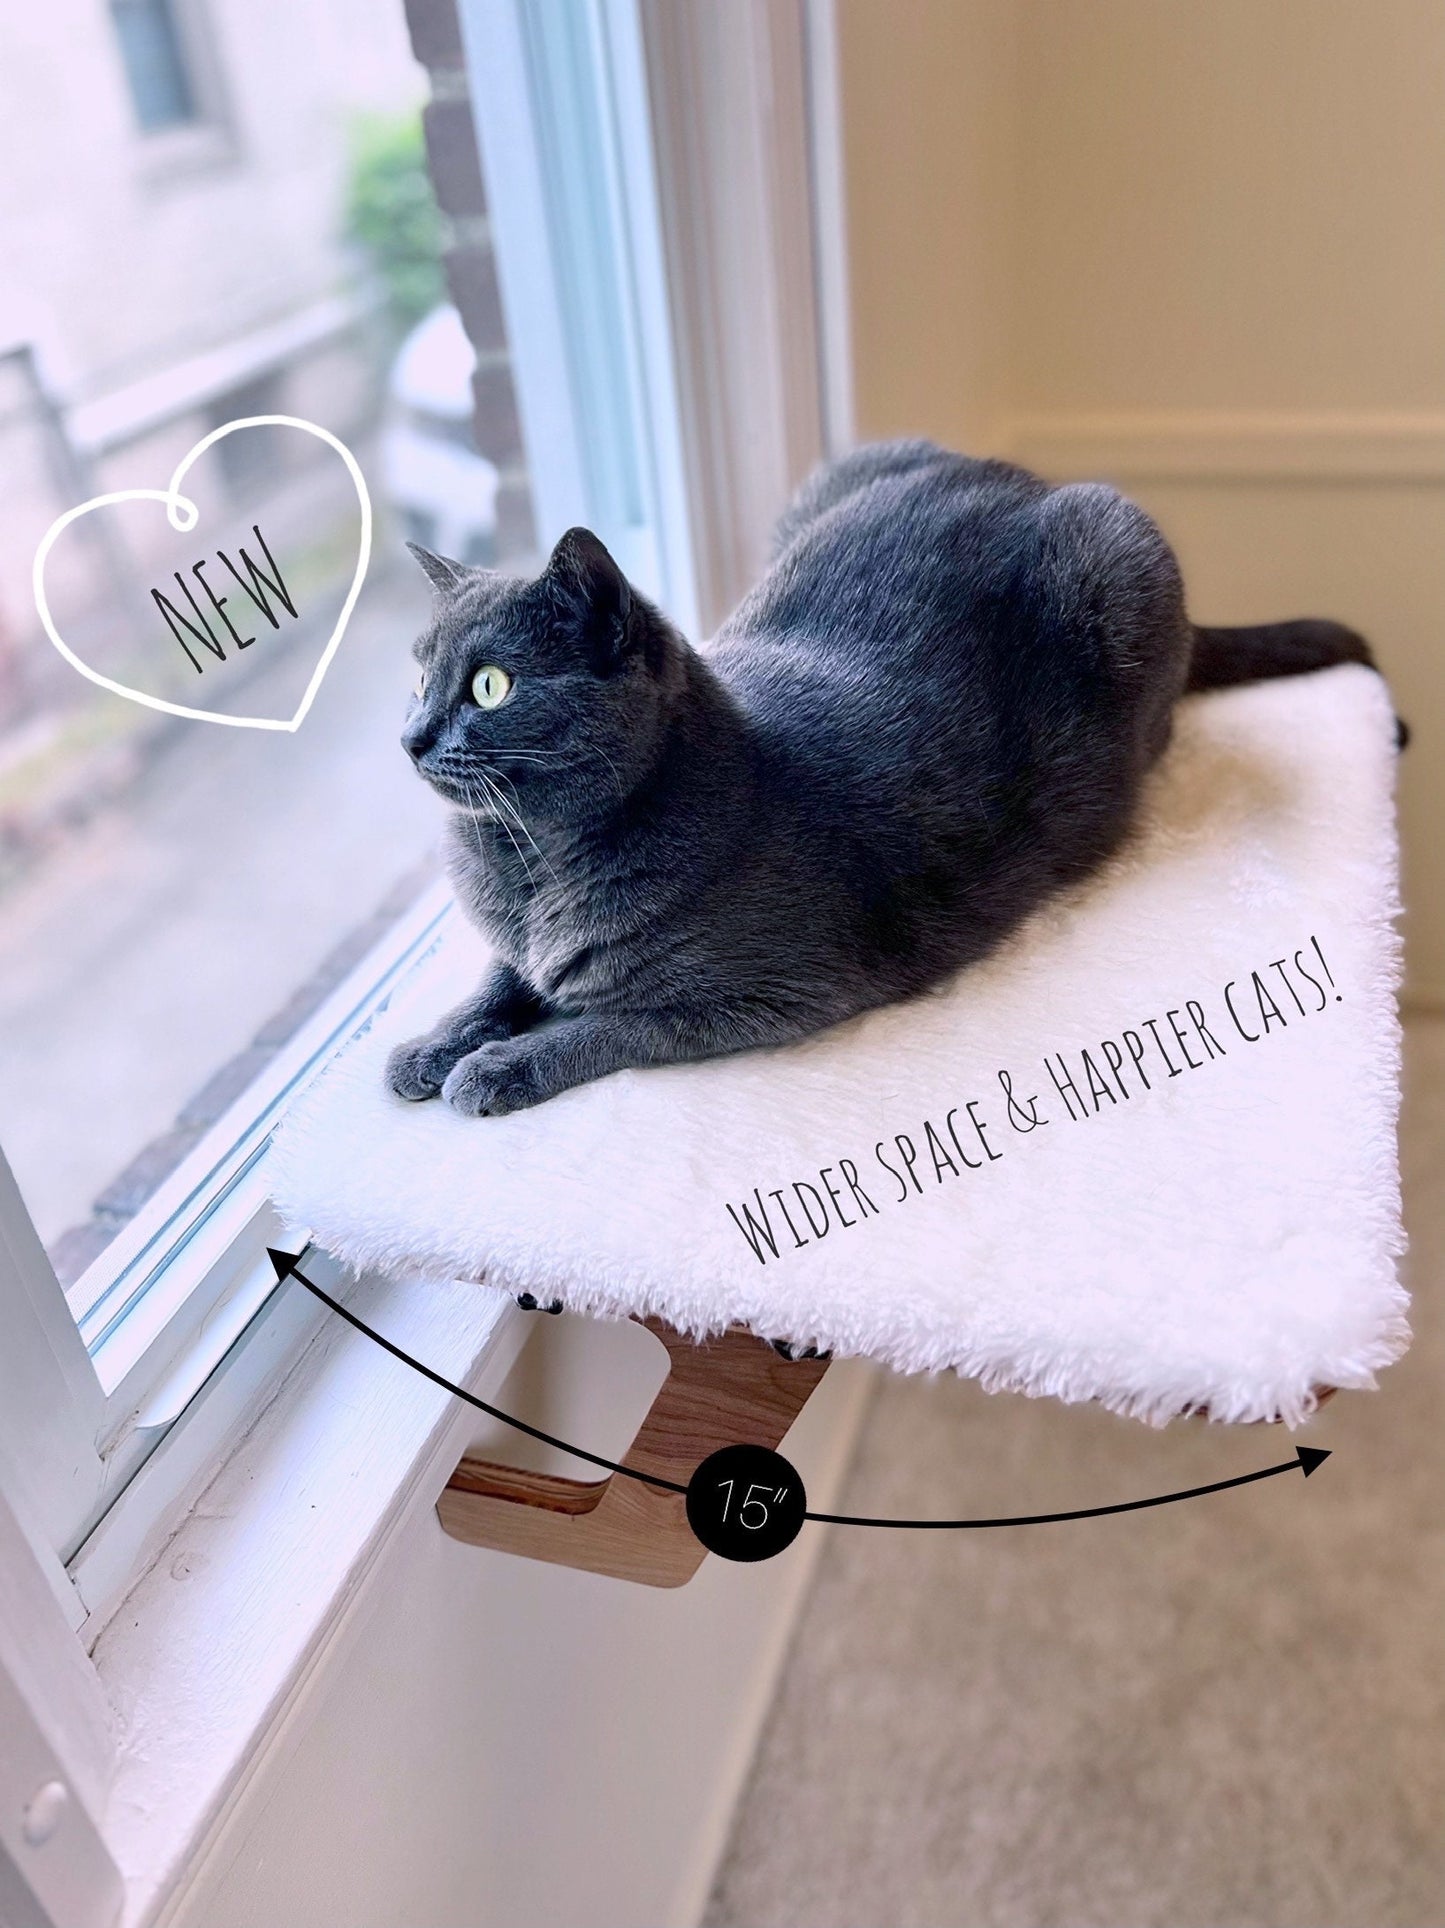 Wider Space & Happier Cats! _ Oak Window Perch _ Sturdy-Safe support legs _ Installed-removed 1 minute _ No tools No nails _ 21" x 15"